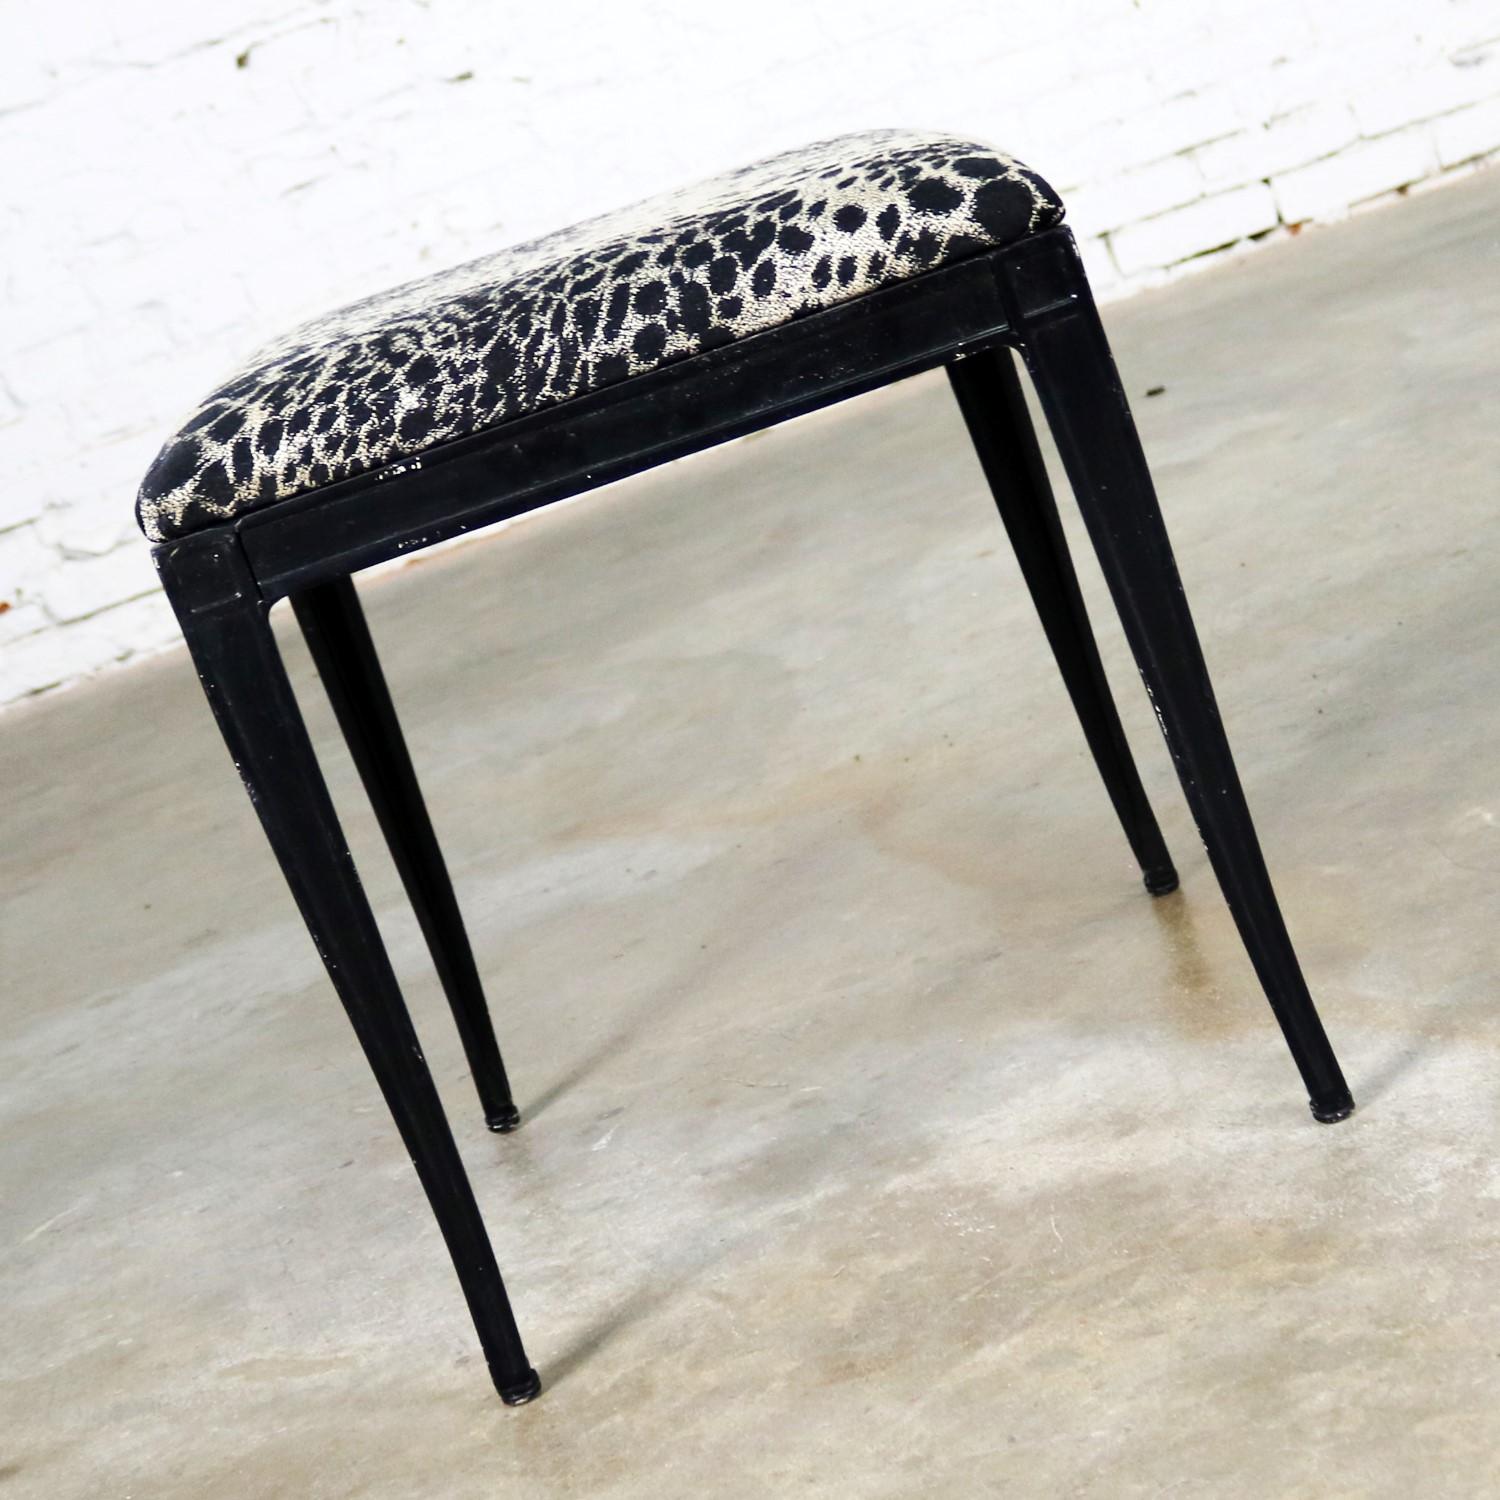 American Black Art Deco and Animal Print Bench Ottoman Footstool Cast Aluminum by Crucibl